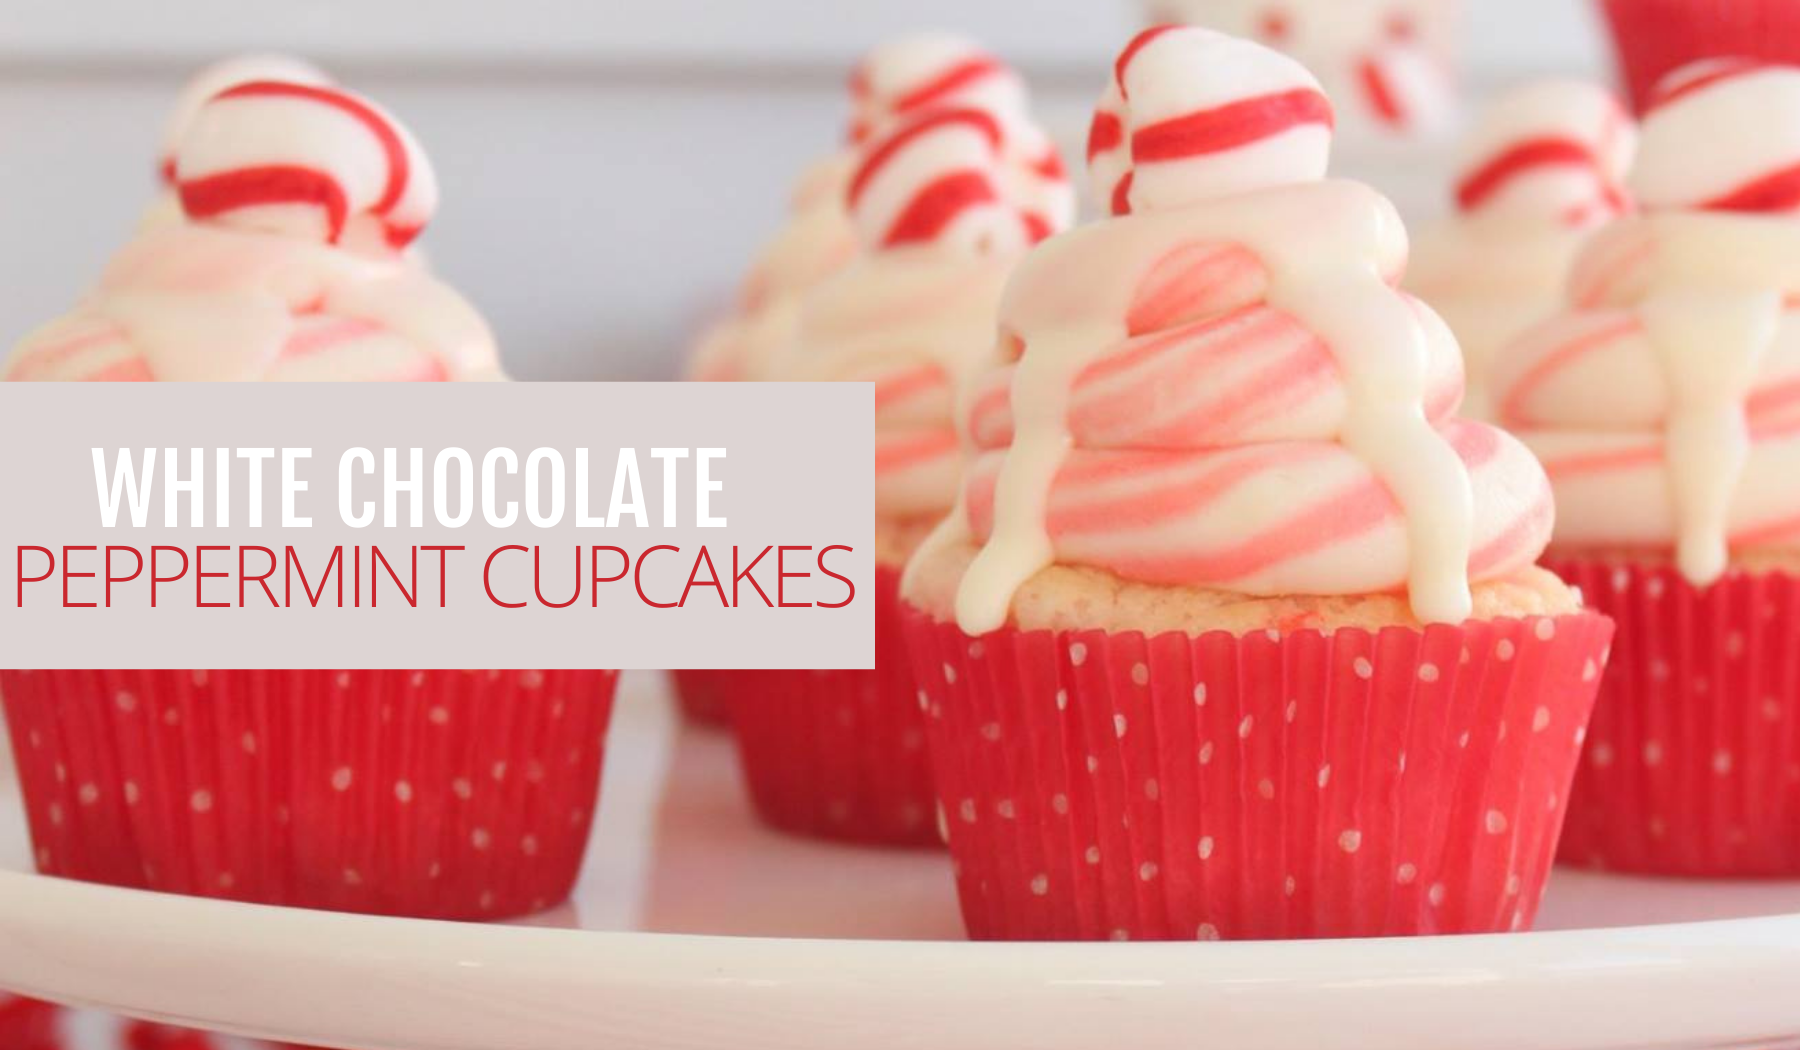 HOW TO MAKE WHITE CHOCOLATE PEPPERMINT CUPCAKES